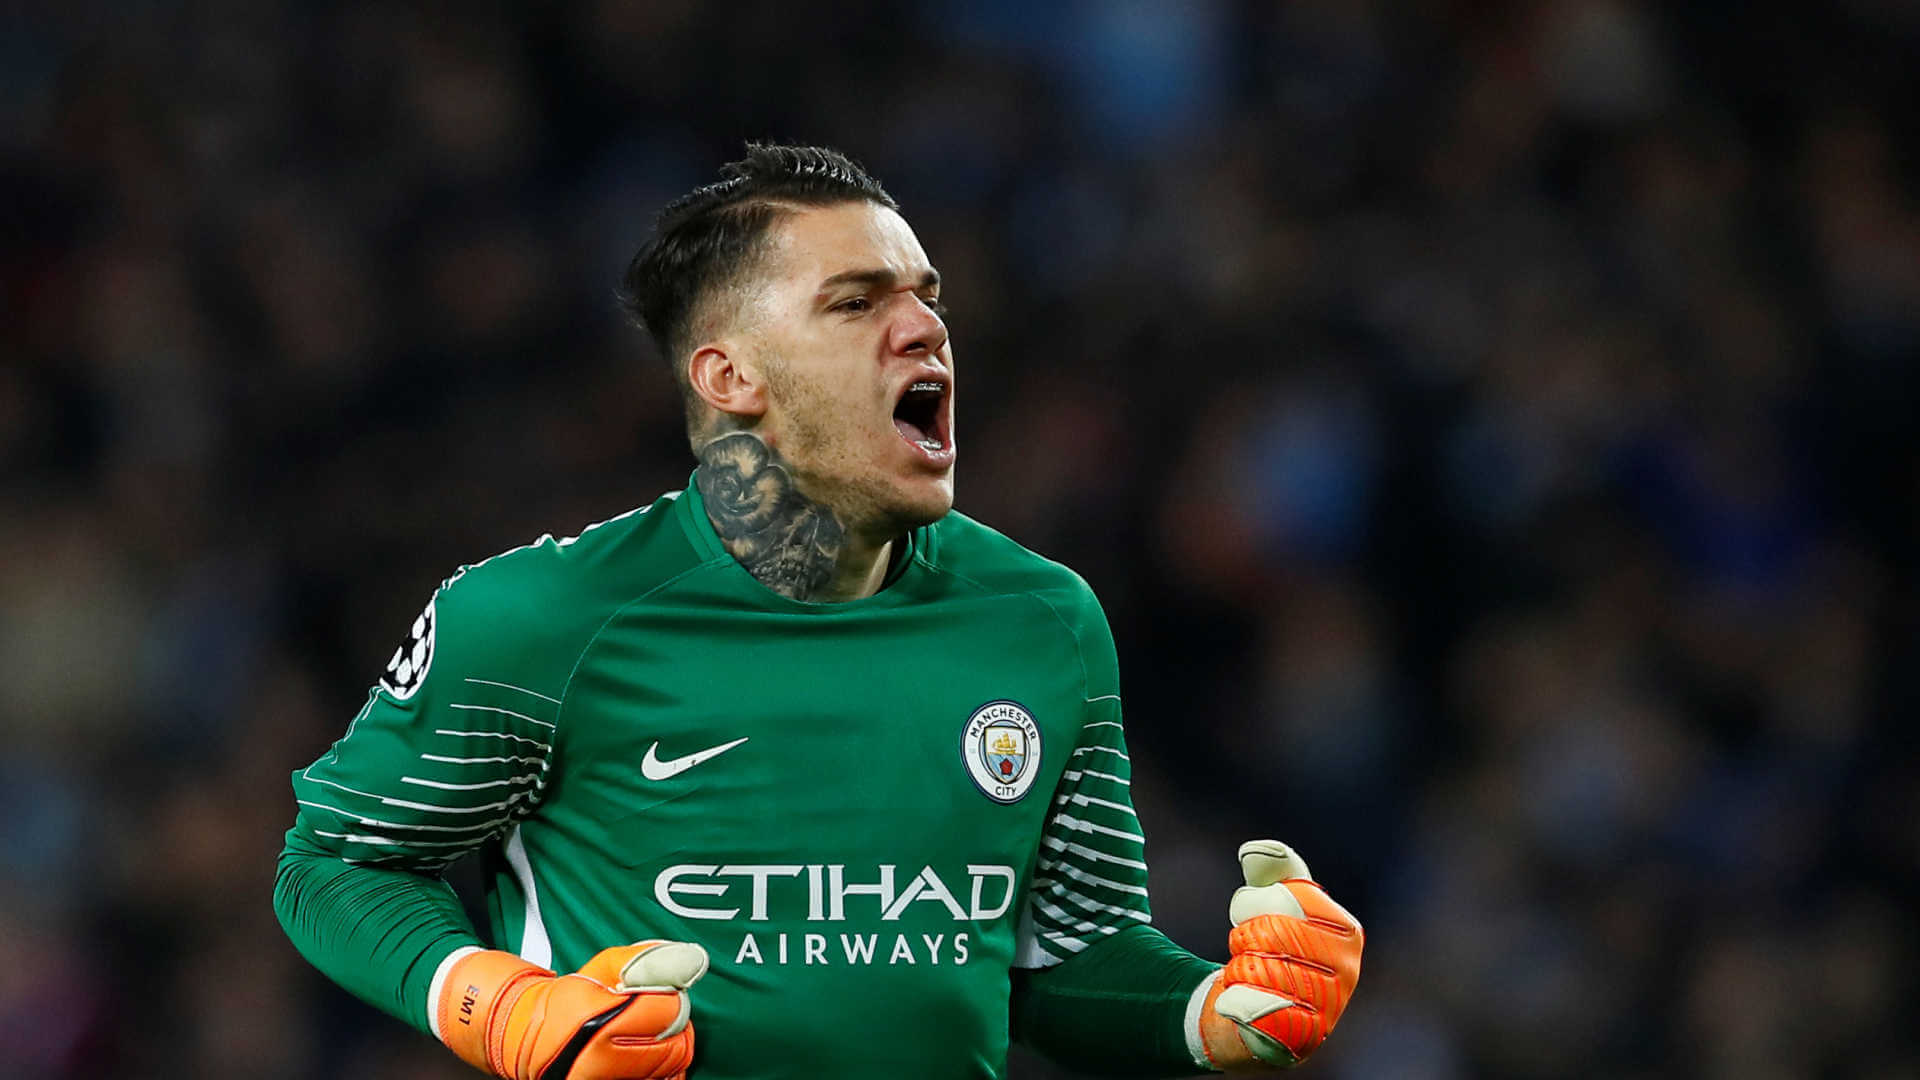 Ederson Almost Quit Football After Suffering Depression1920 x 1080